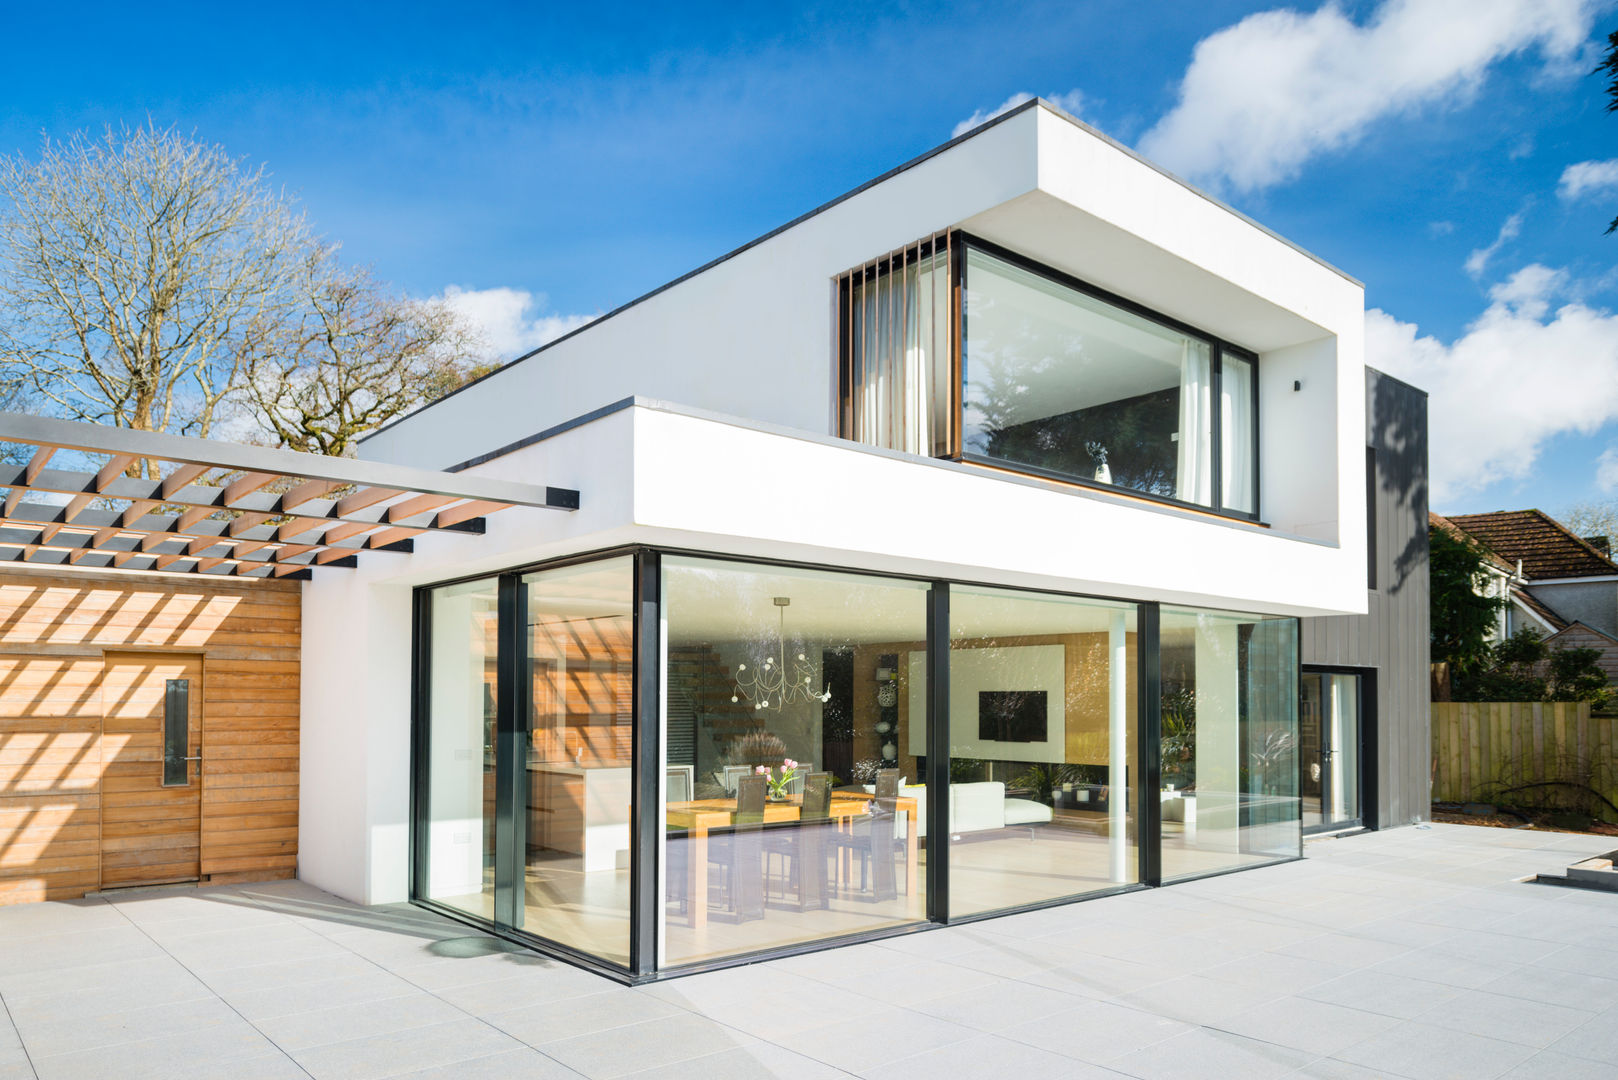 White Oaks Exterior Barc Architects Maisons modernes contemporary,modern,bold,glass,render,flat roof